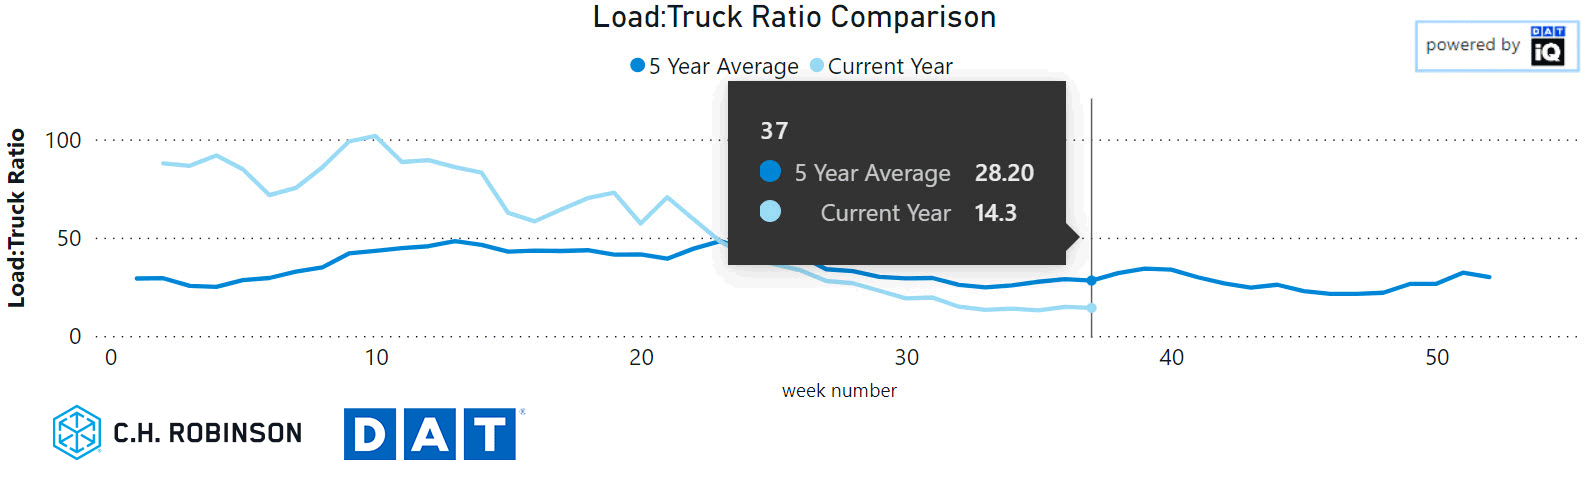 flatbed load:truck ratio 5 year comparrison 